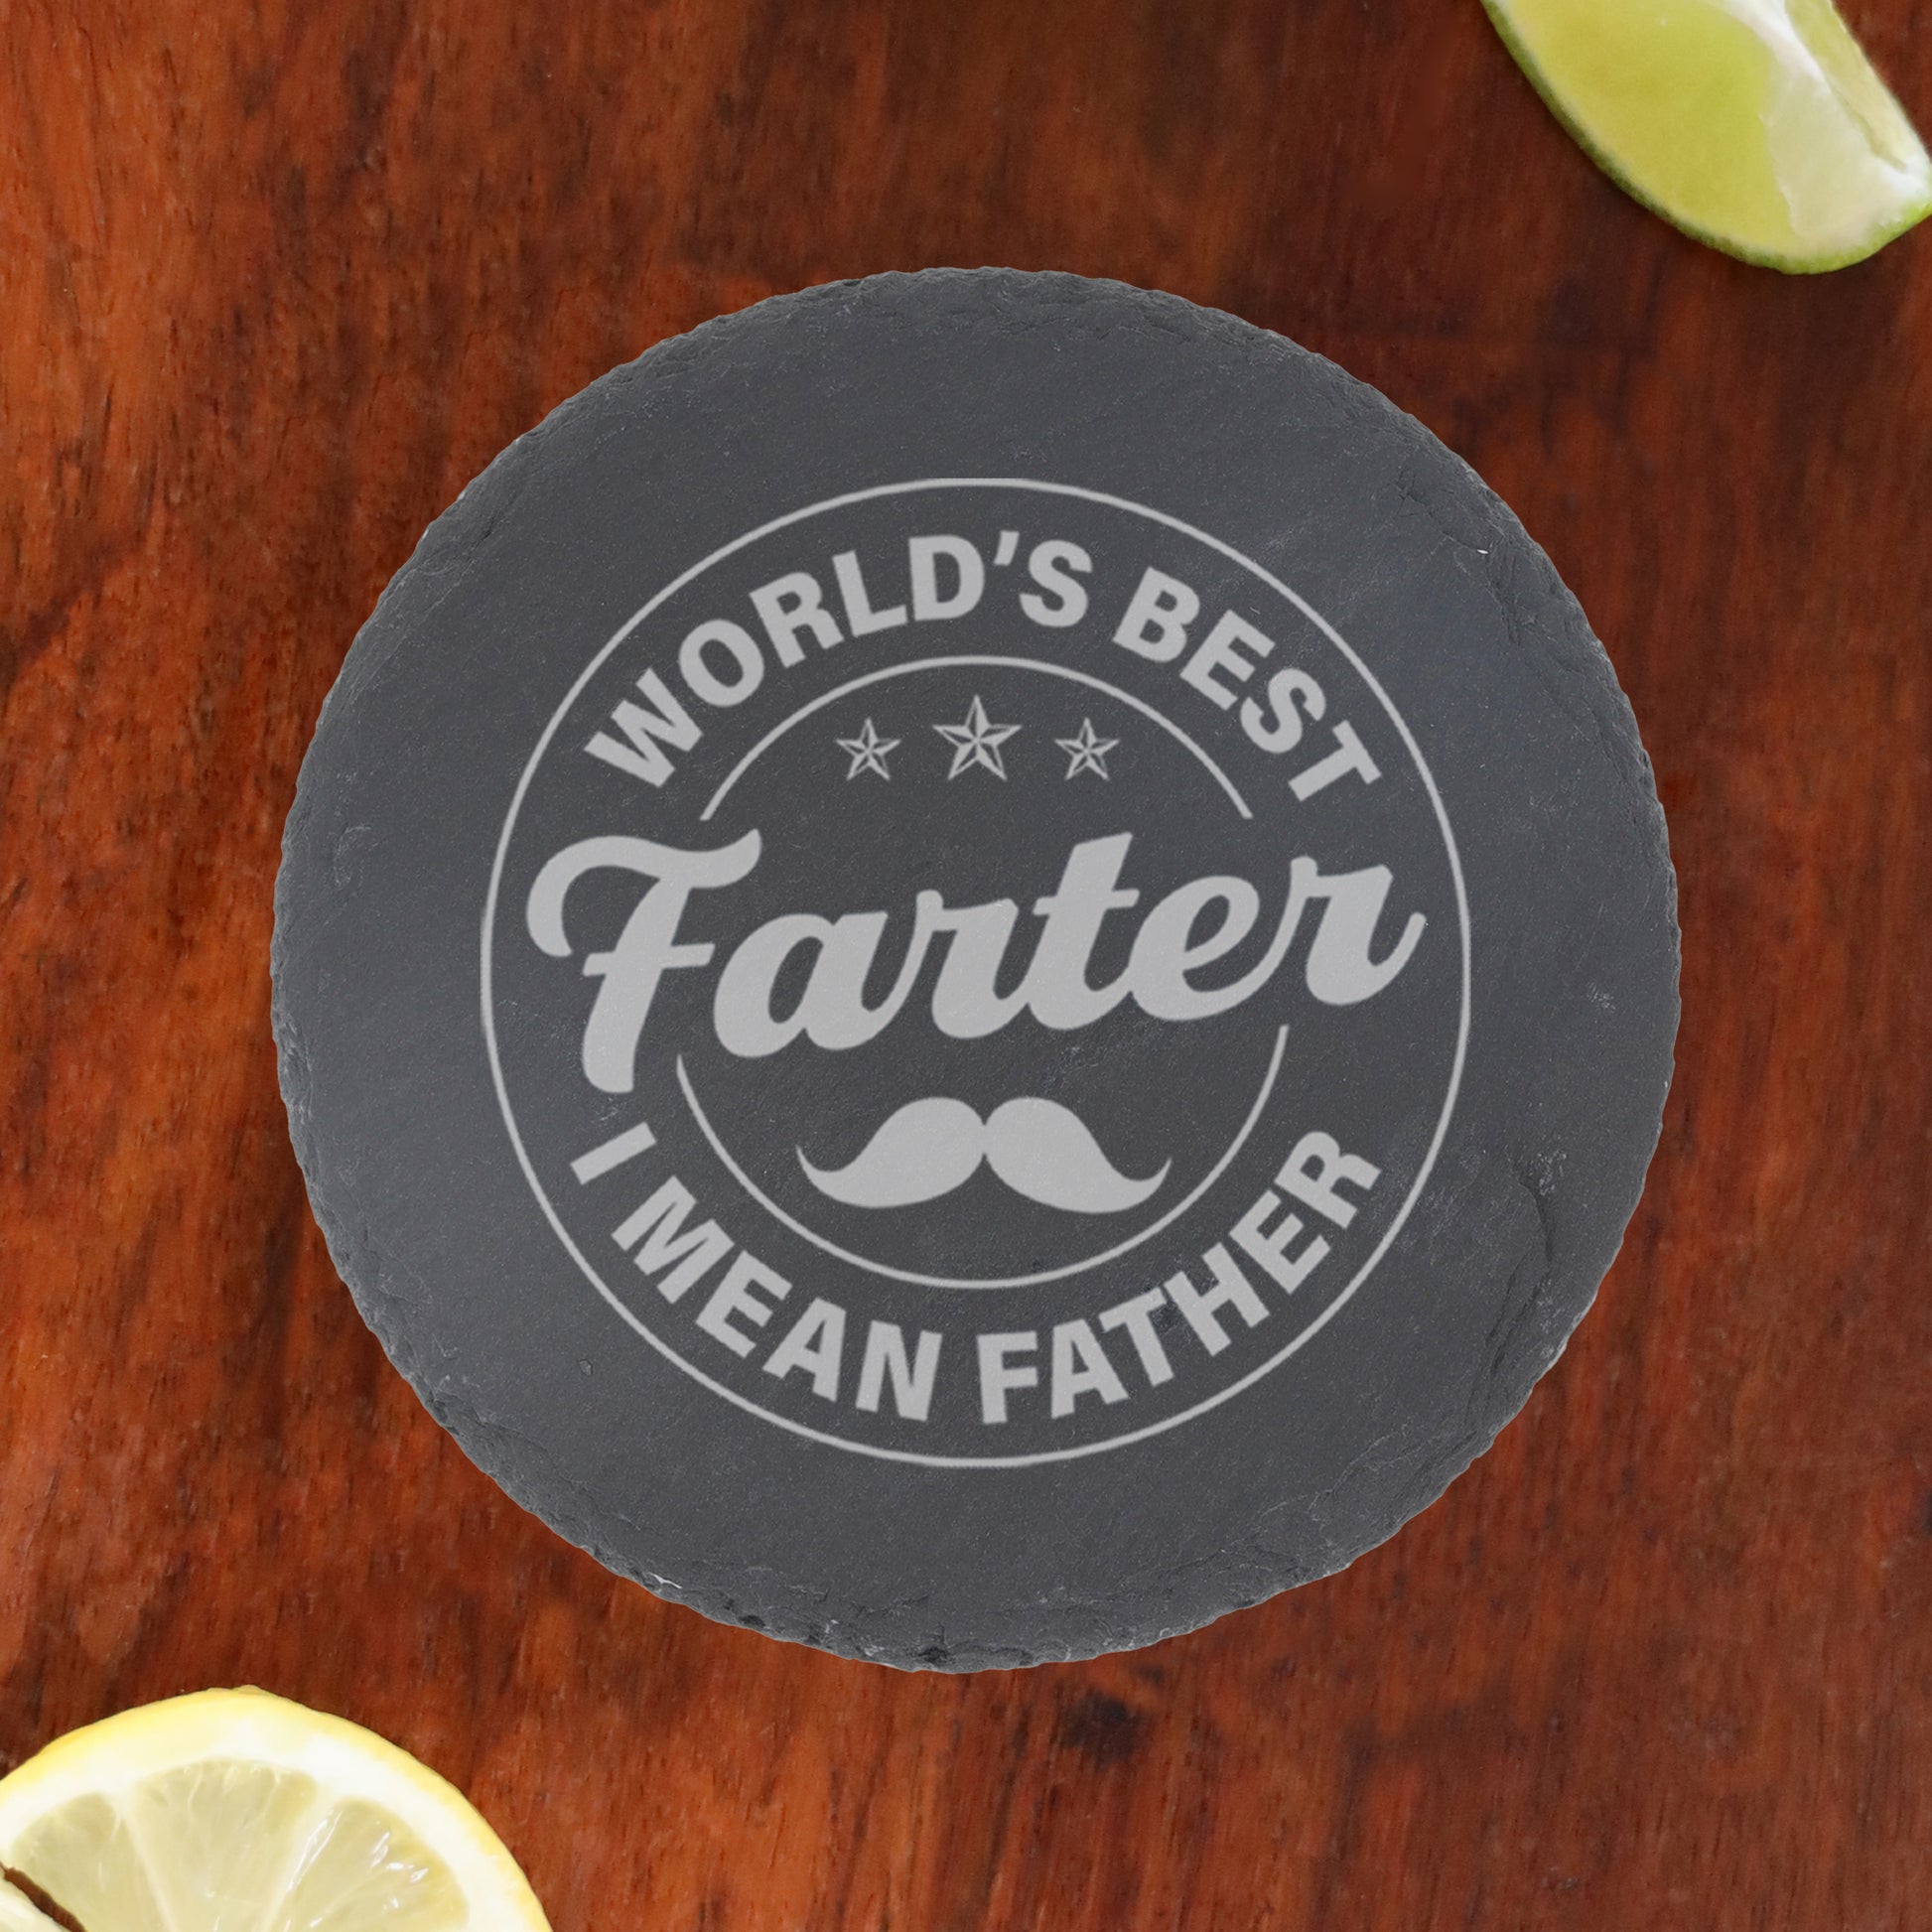 "Worlds Best Farter I Mean Father" Novelty Engraved Whisky Glass  - Always Looking Good - Round Coaster Only  